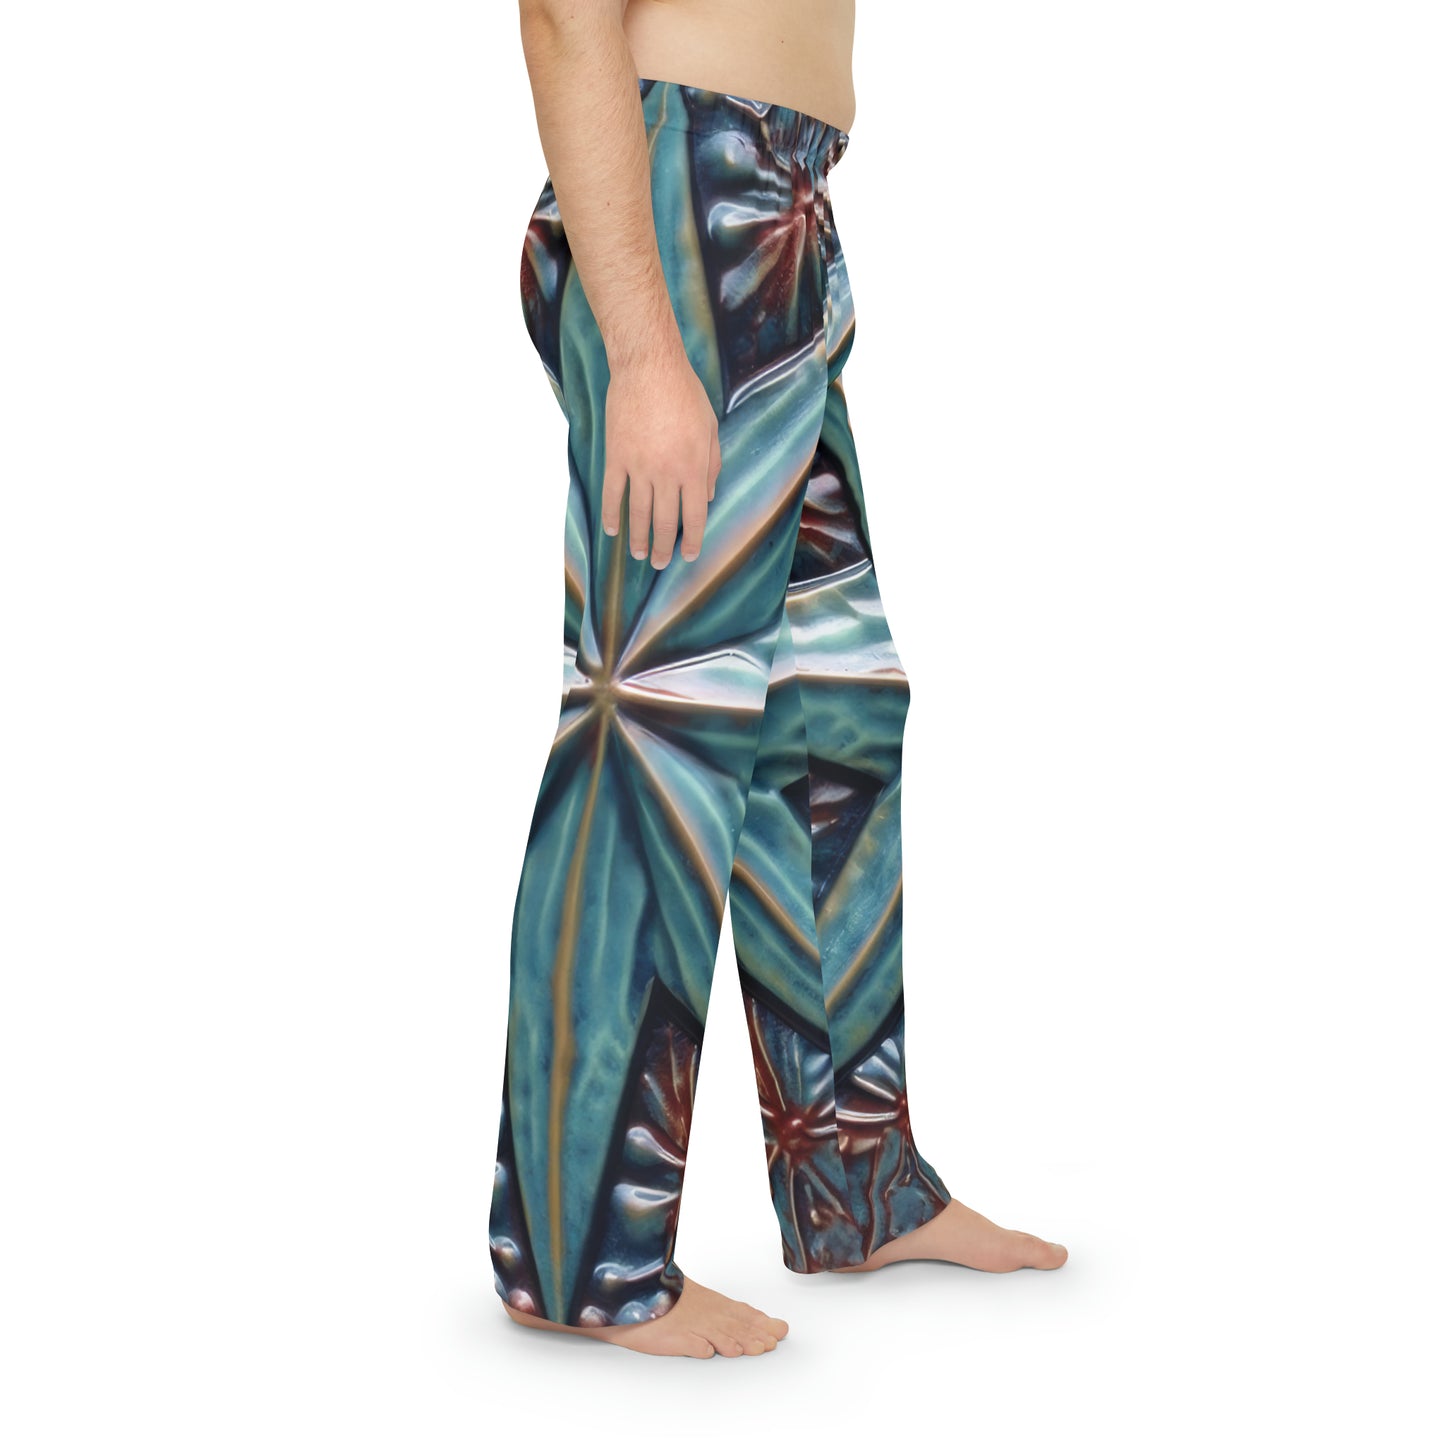 Beautiful Stars Abstract Star Style Blue And Red Men's Pajama Pants (AOP)